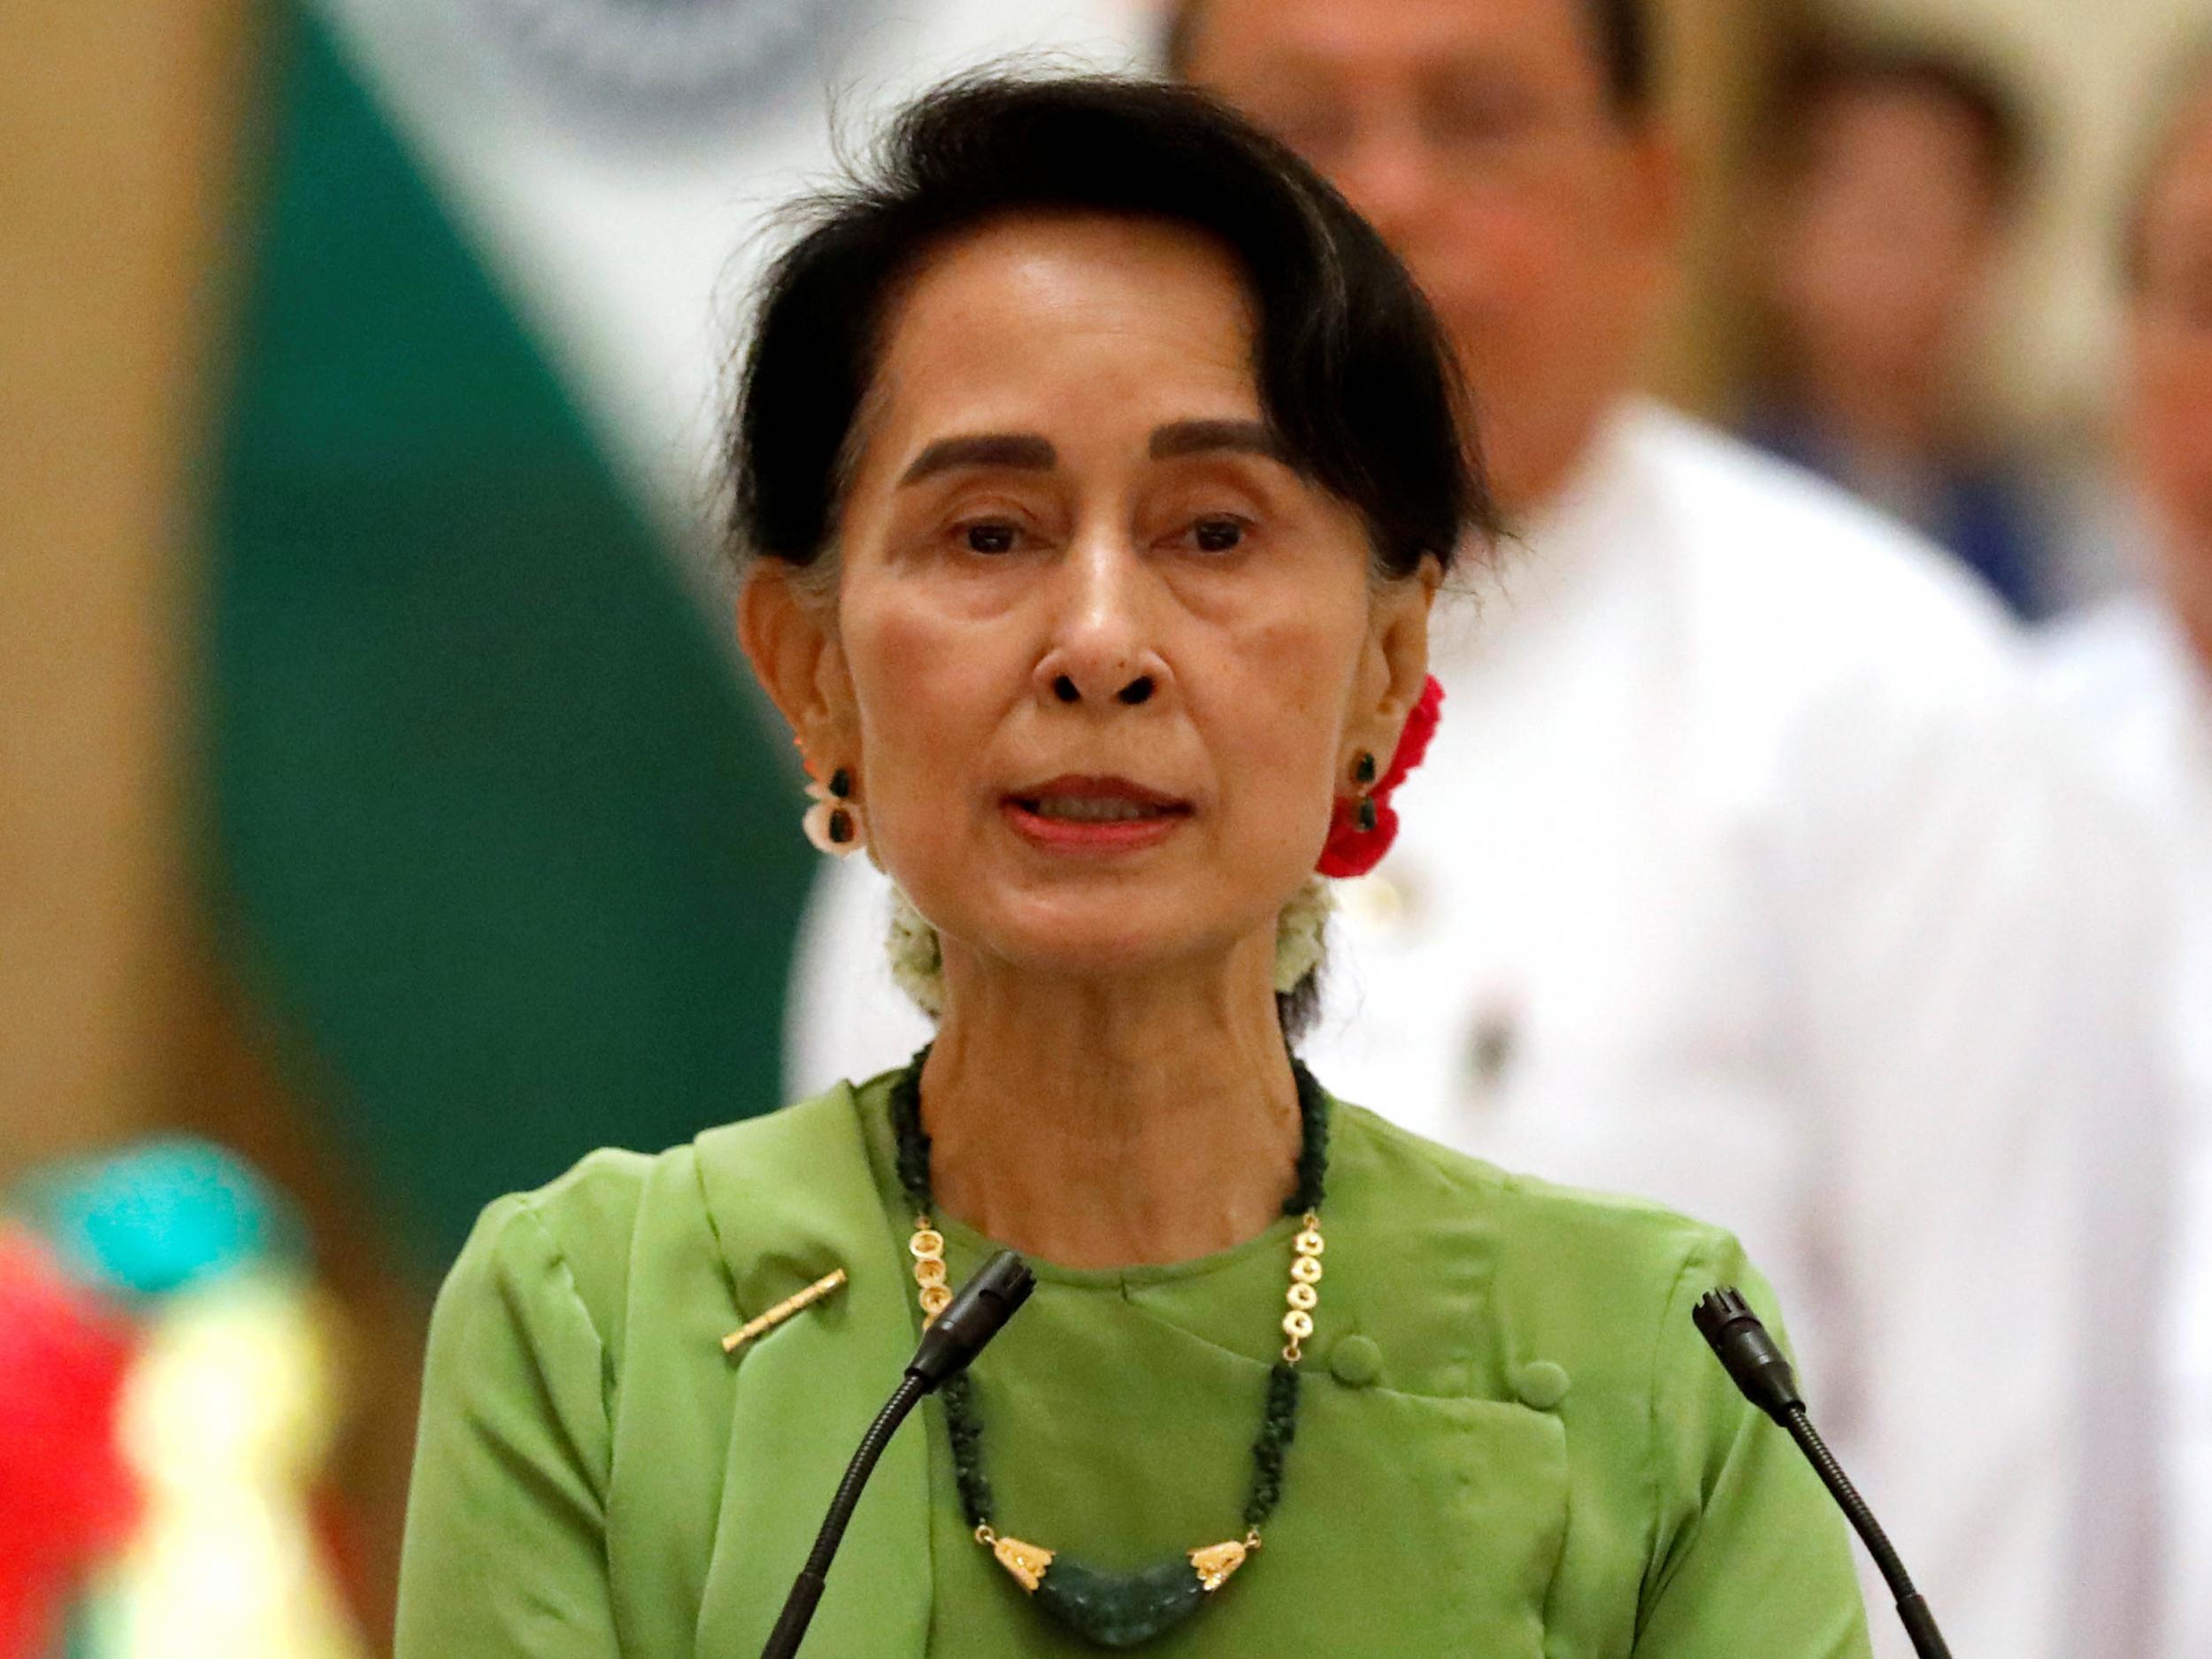 Ms Suu Kyi was criticised last year for reportedly making an Islamophobic comment against a BBC journalist